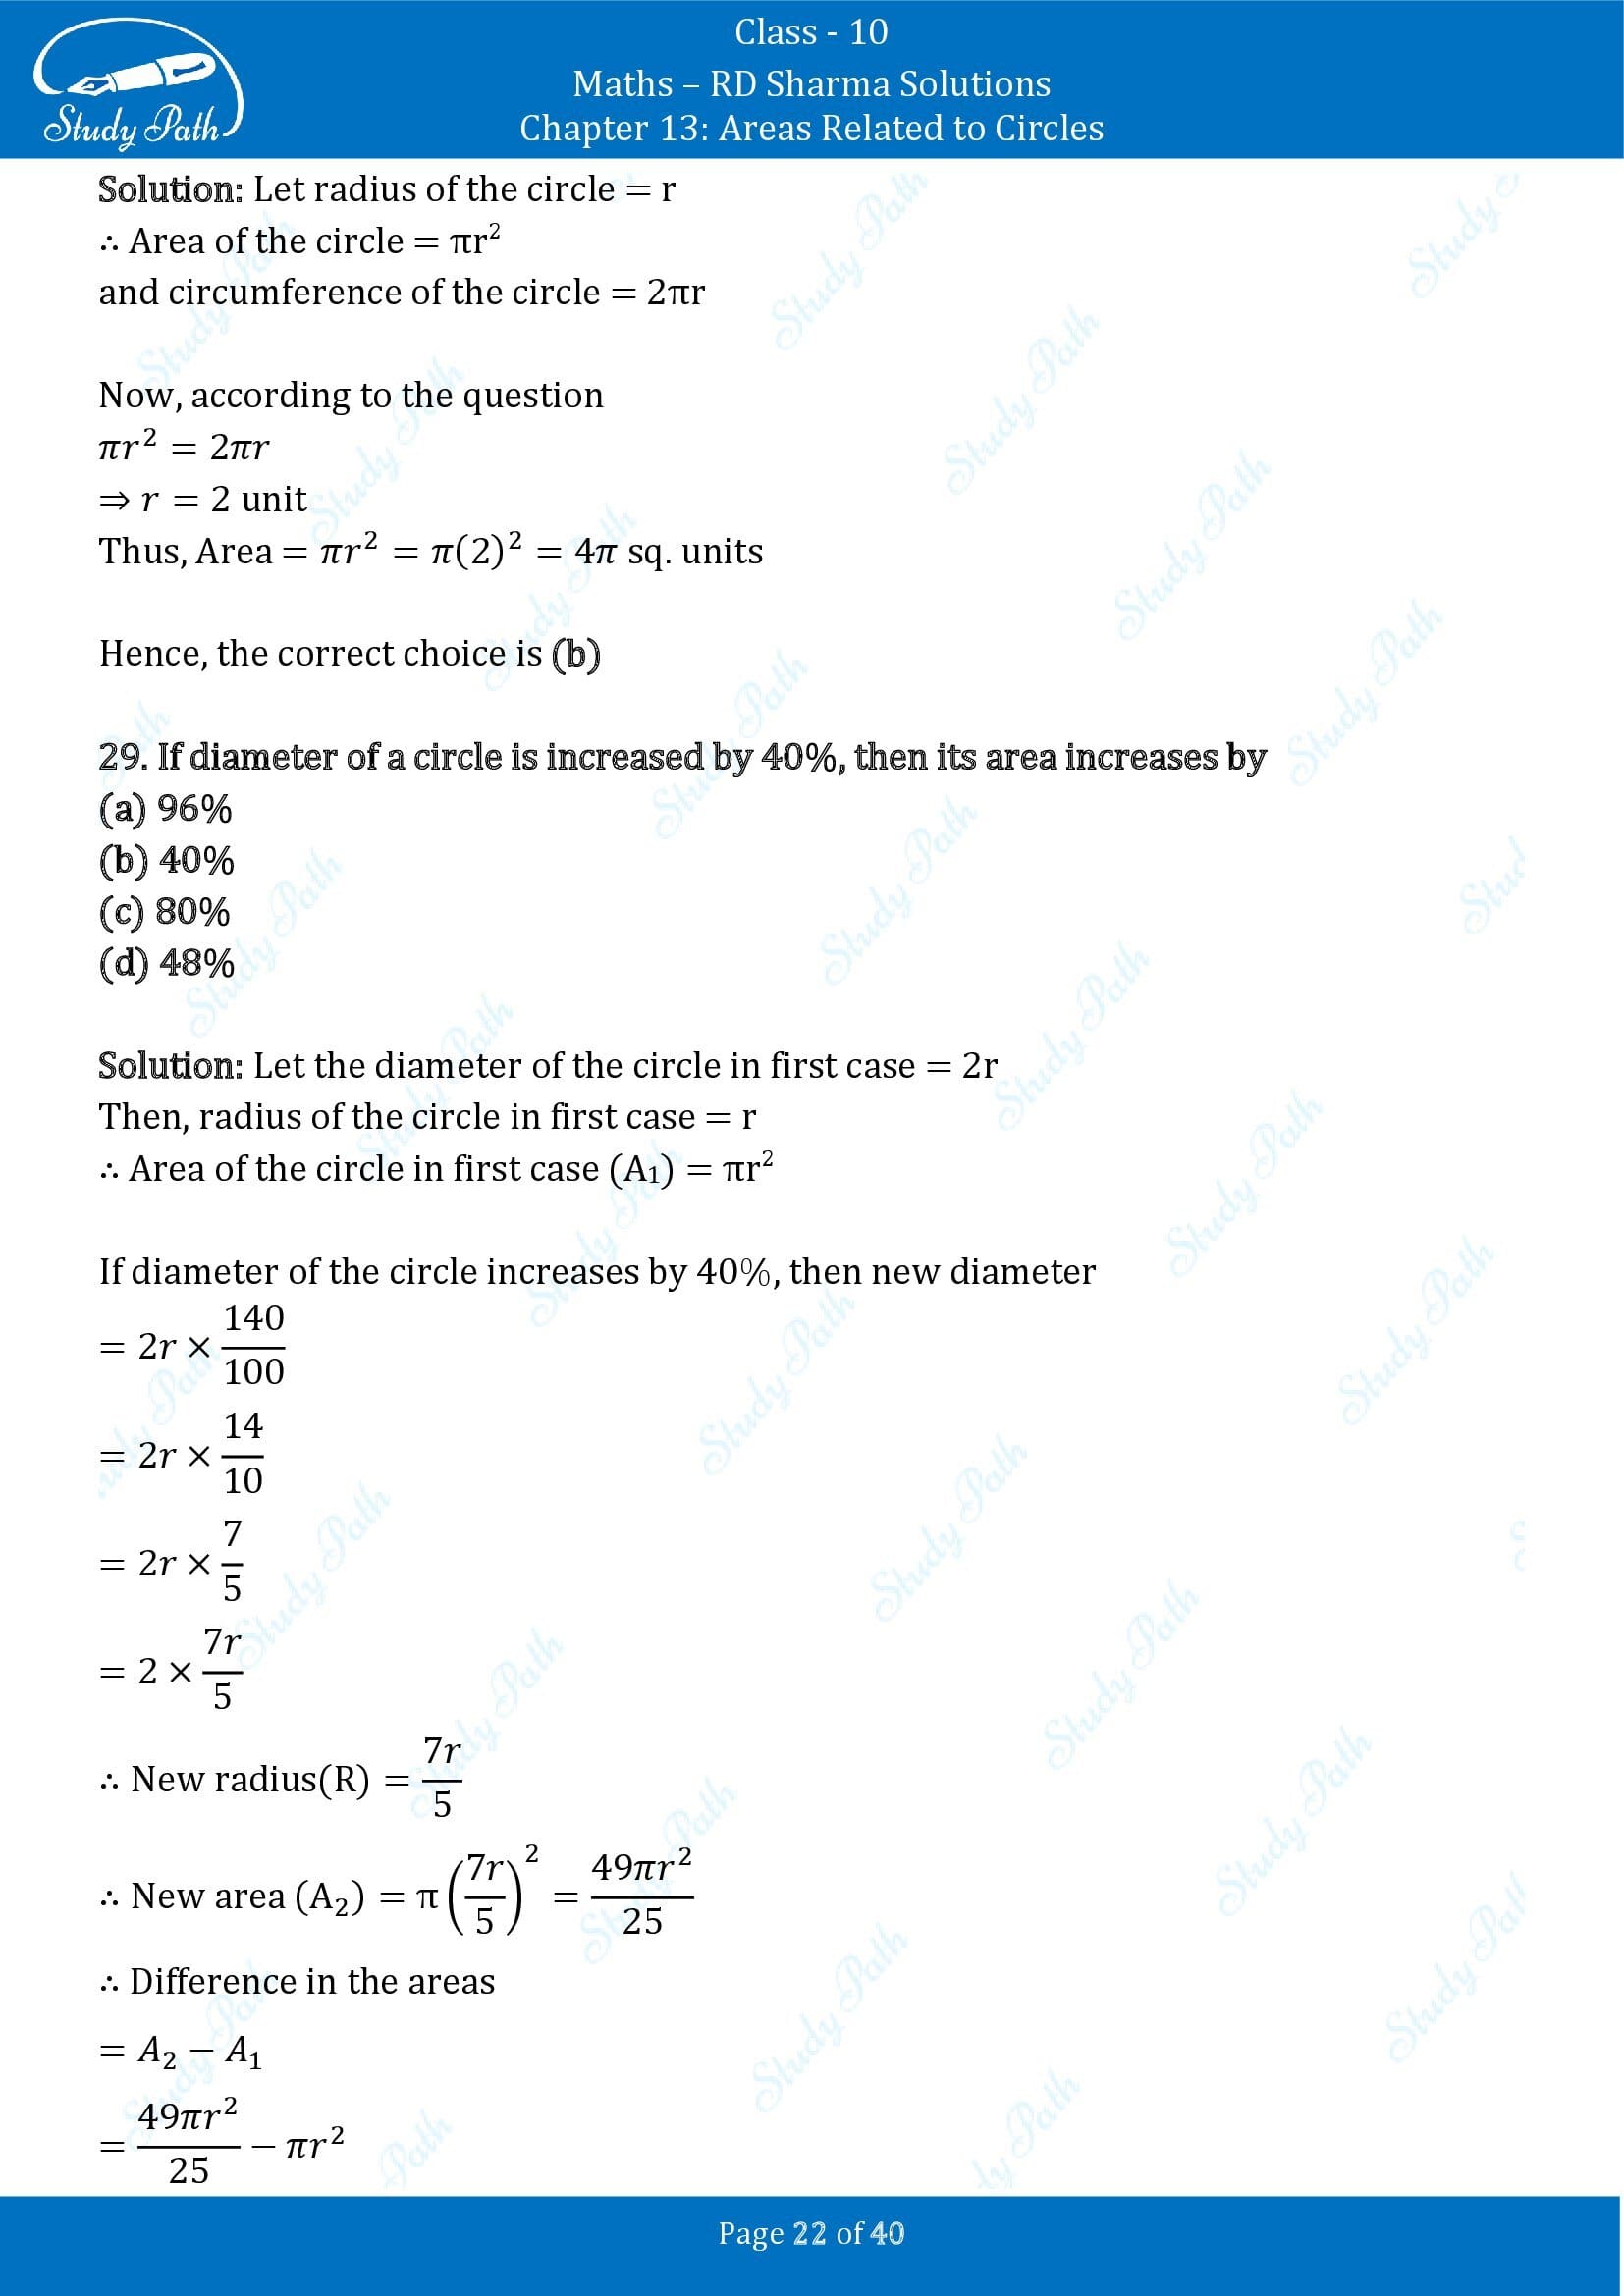 RD Sharma Solutions Class 10 Chapter 13 Areas Related to Circles Multiple Choice Question MCQs 00022